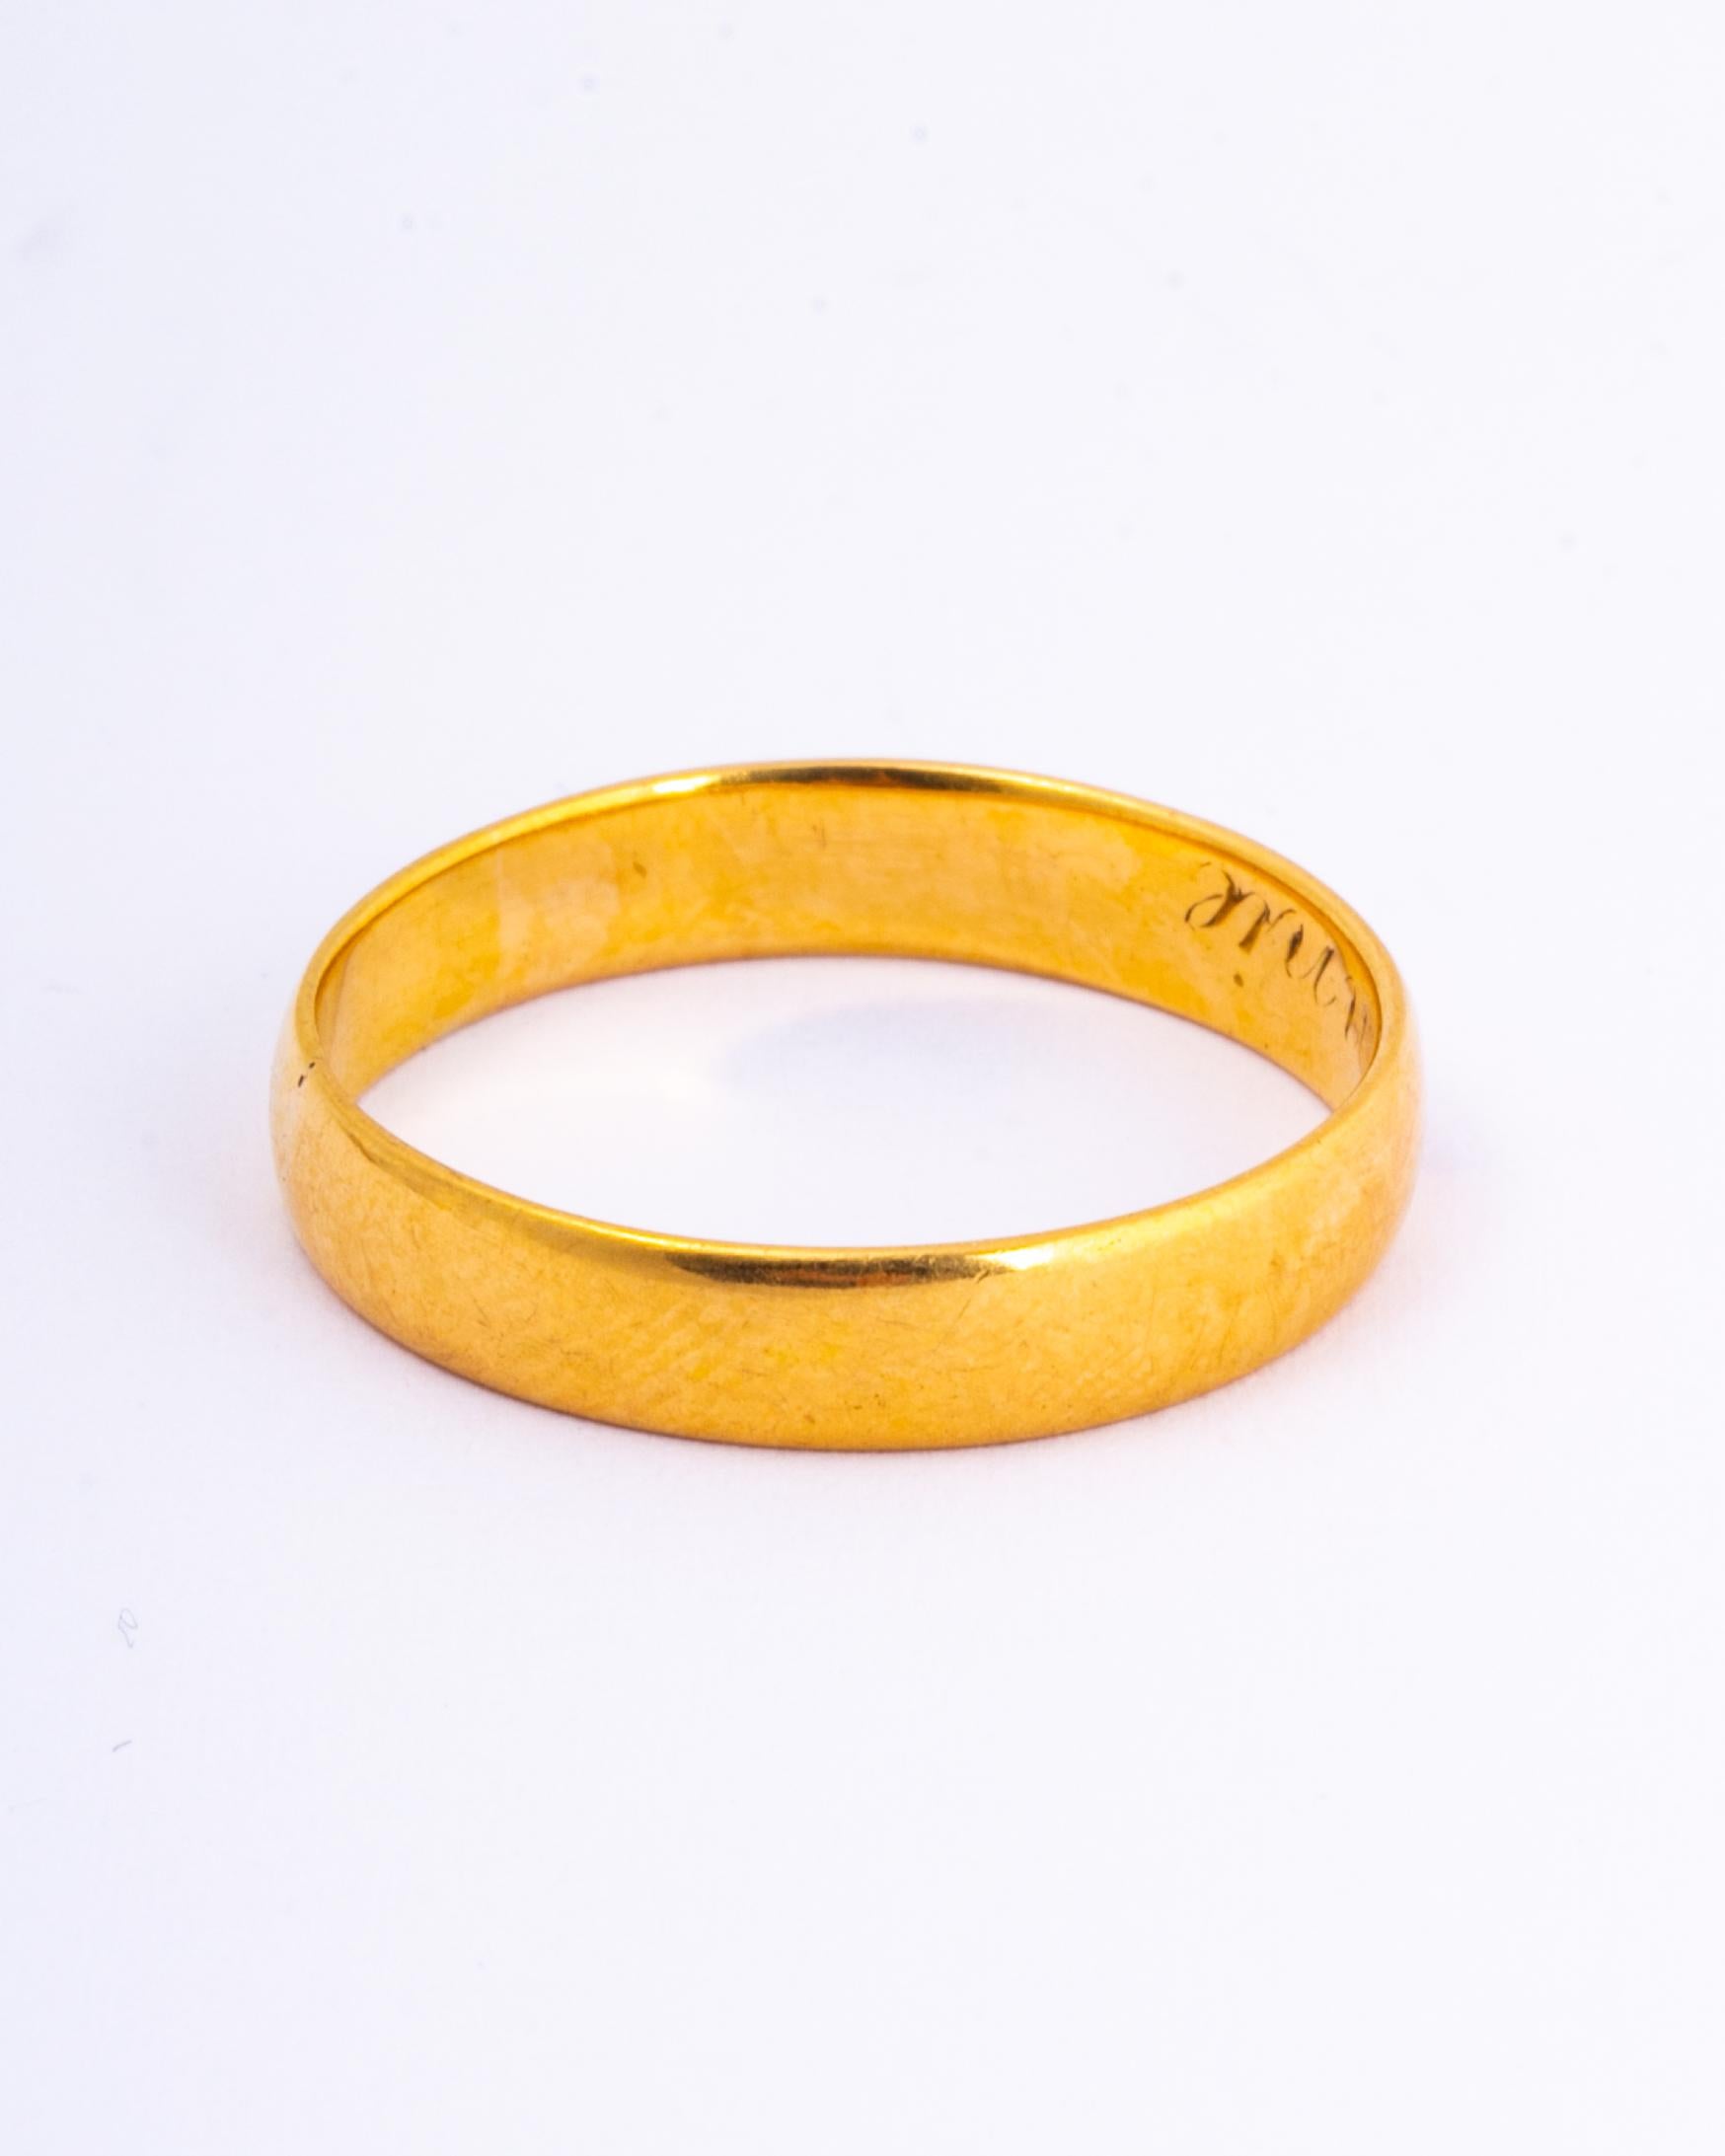 Glossy 22ct gold band perfect for a wedding band or just a simple everyday piece. The inside of this band has the names  'Henry-Annie' engraved into it.

Ring Size: V or 10 1/2 
Band Width: 4.5mm

Weight: 4.3g